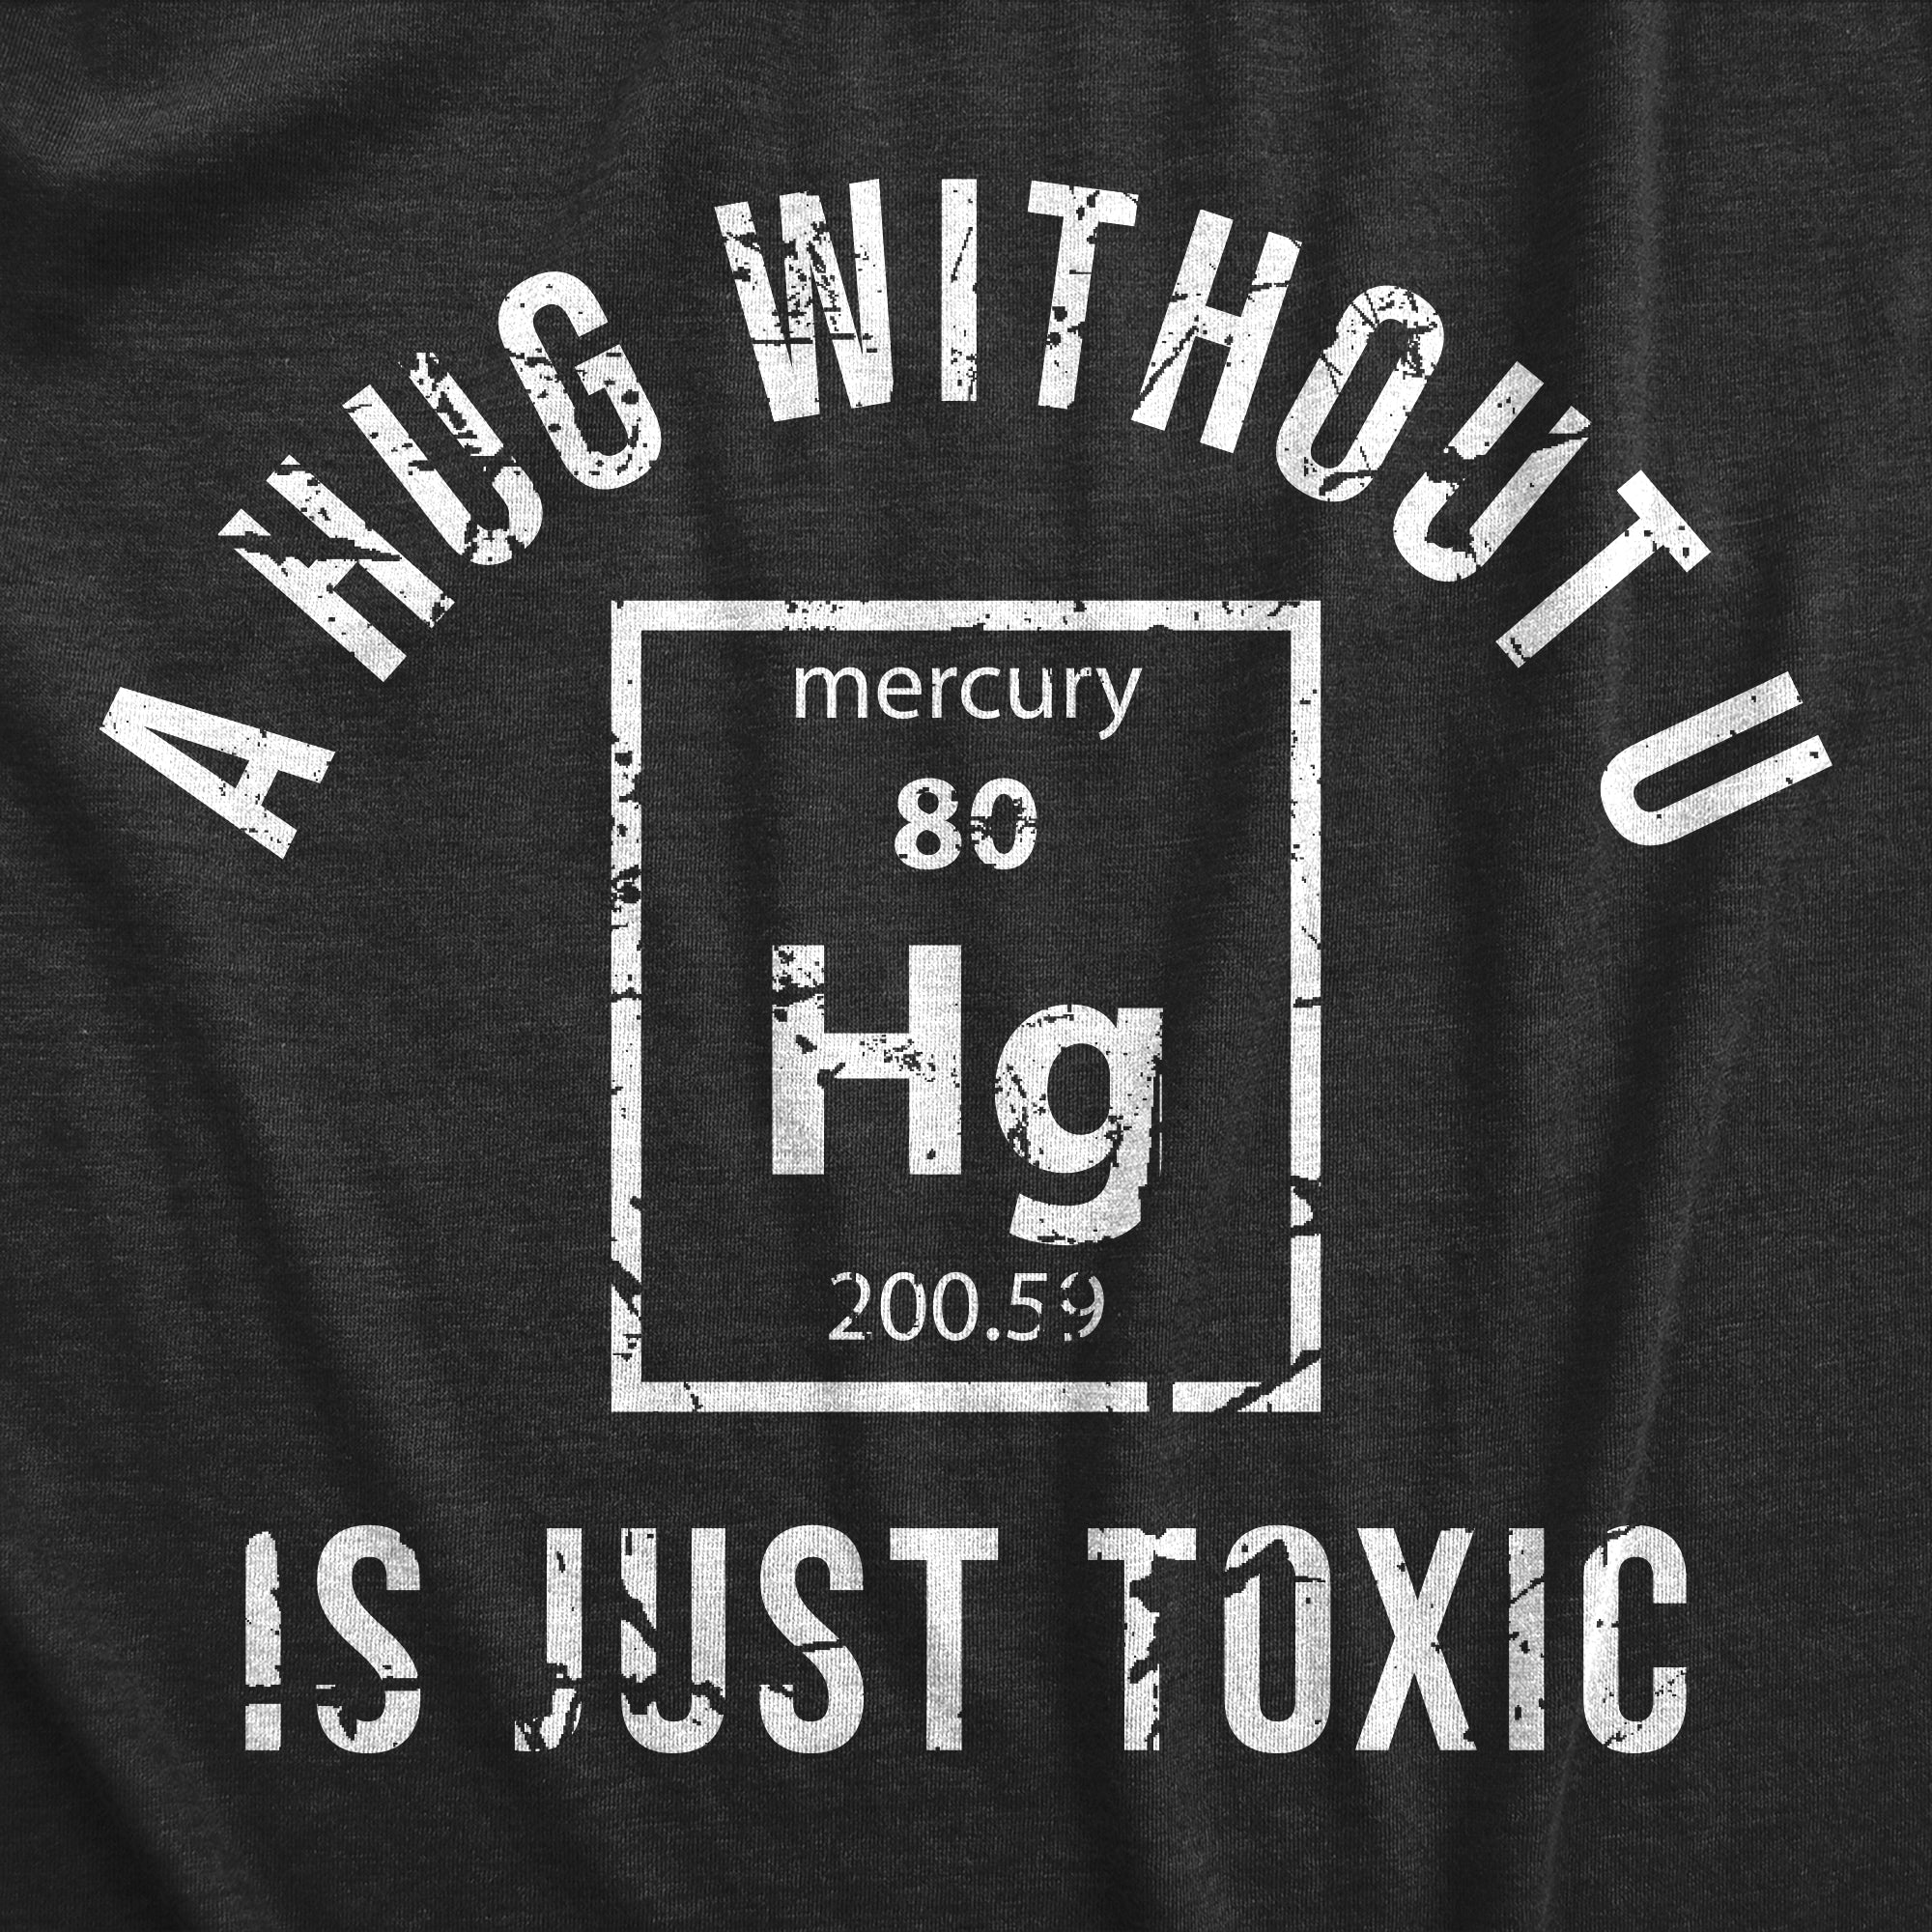 Funny Heather Black - TOXIC A Hug Without U Is Just Toxic Mens T Shirt Nerdy Science Nerdy Tee